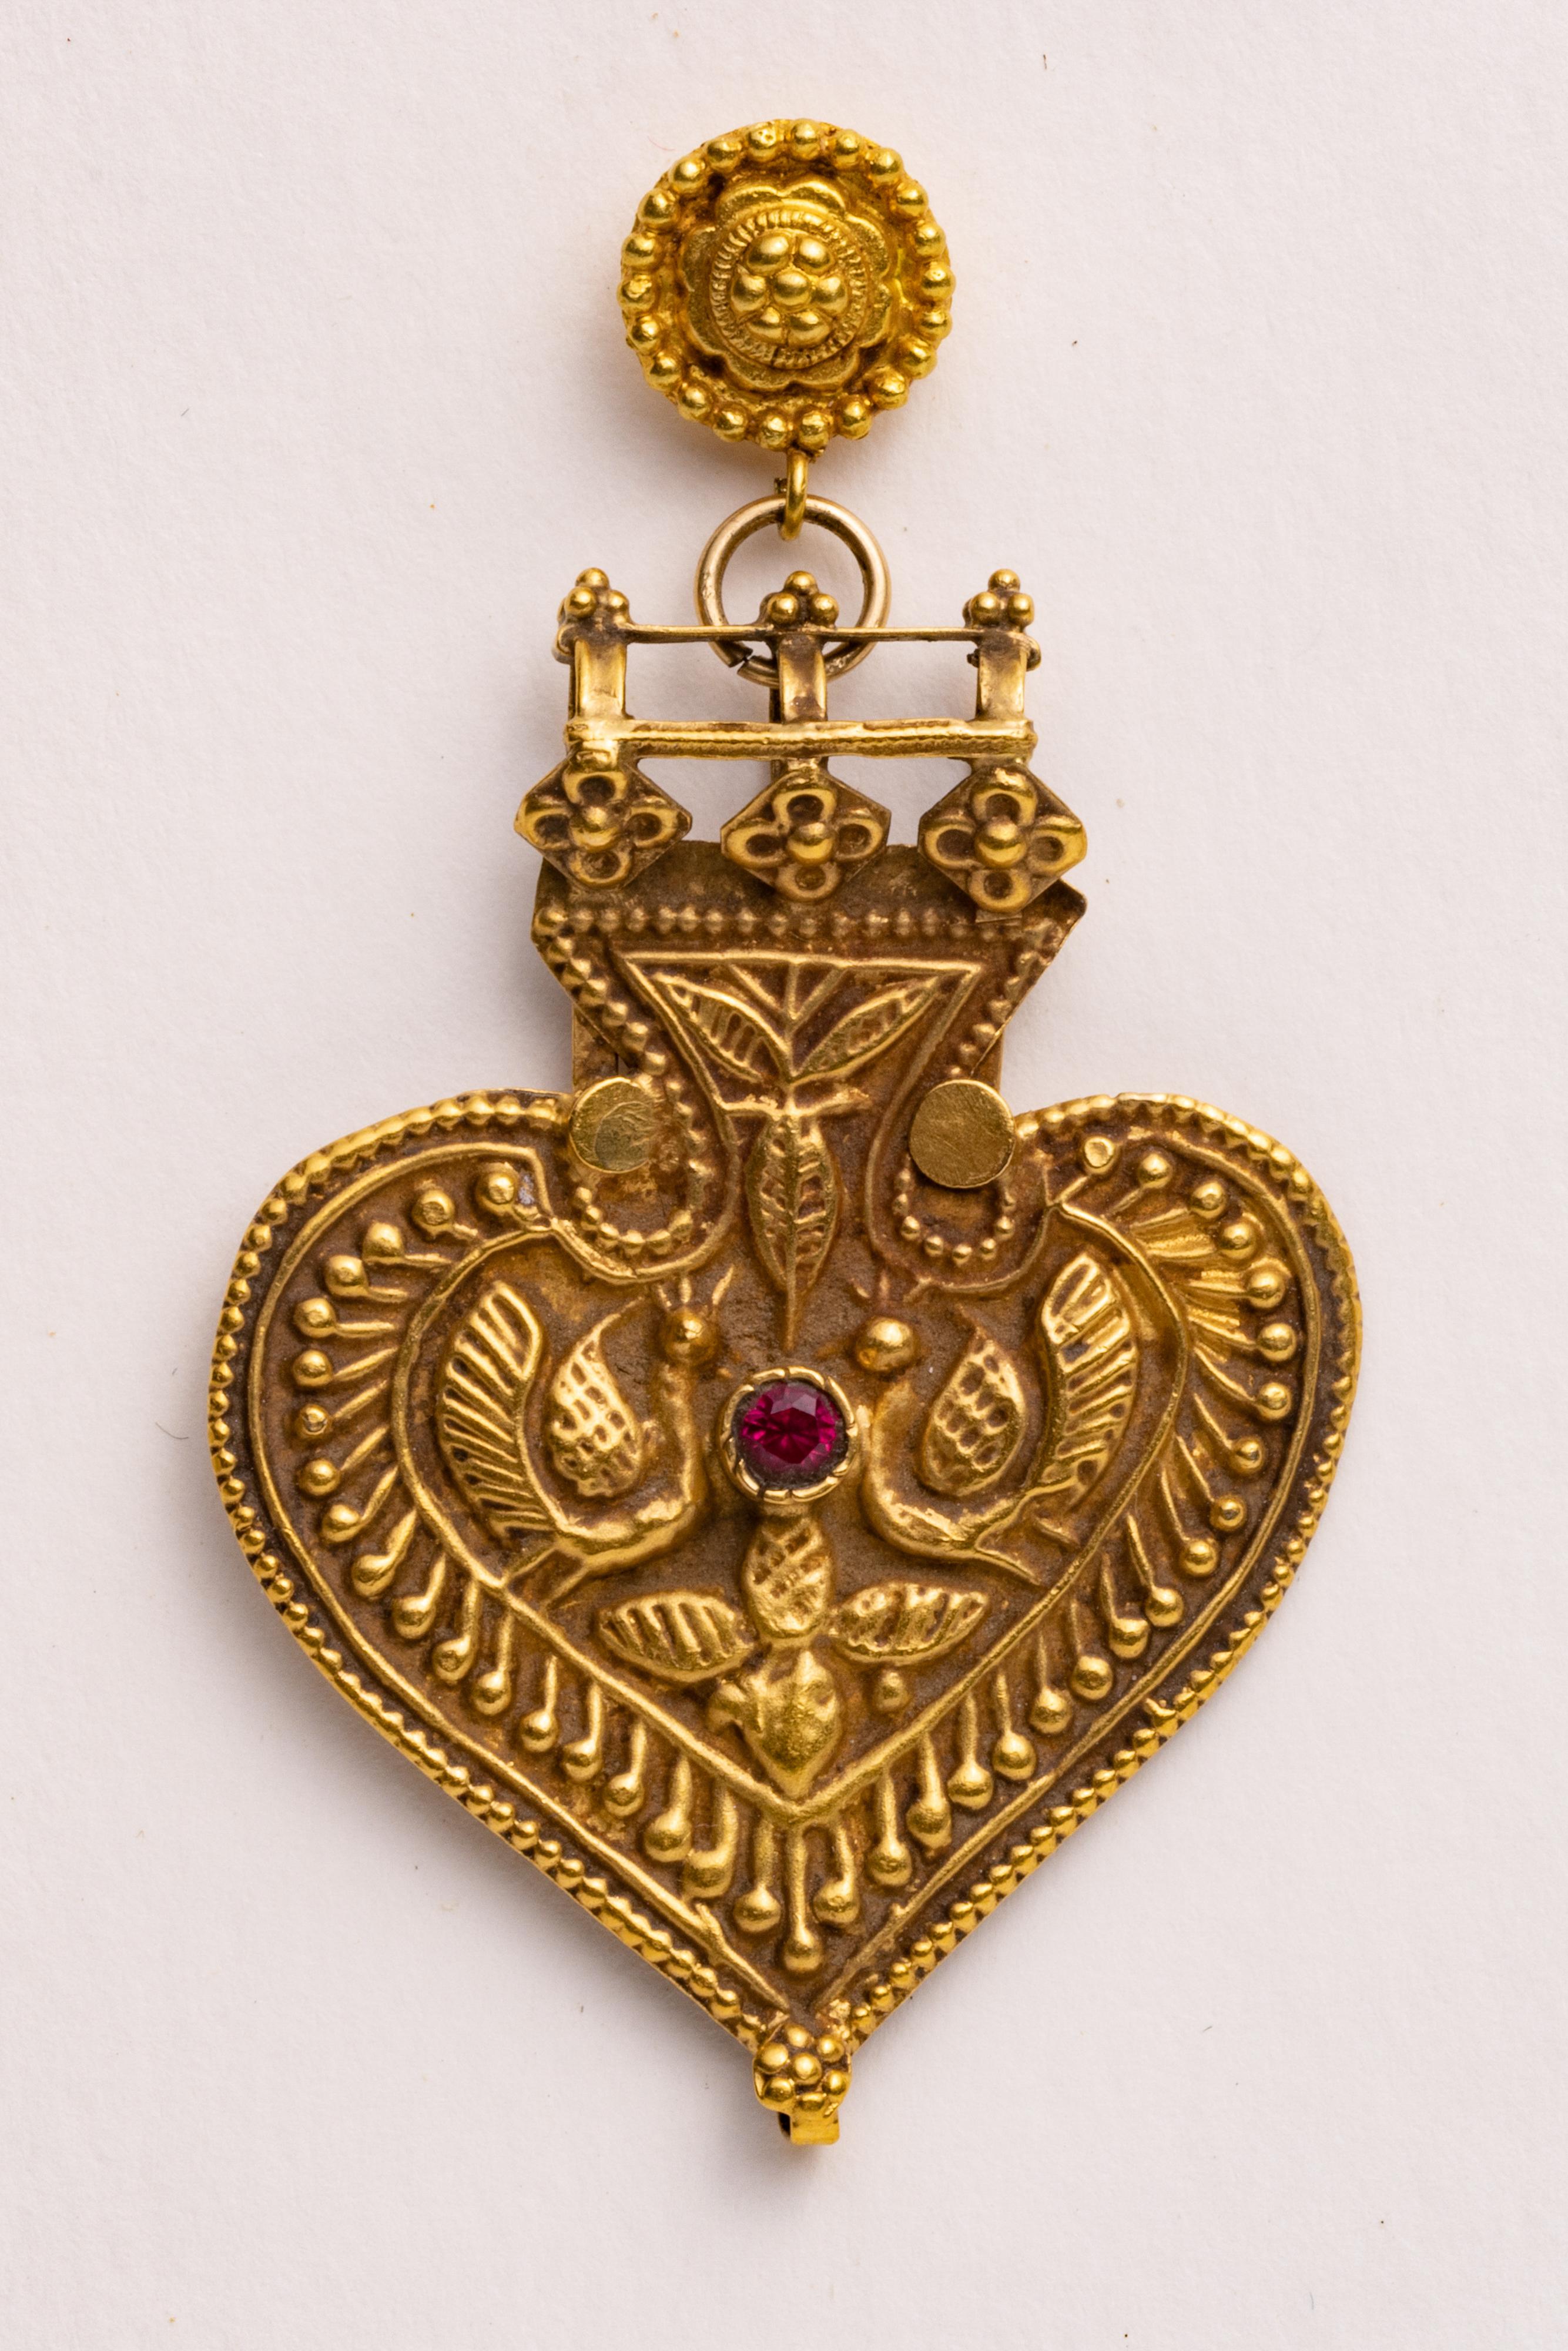 These are extraordinary Indian pendants converted to earrings.  If you look closely, these are not an exact pair.  They share the spade-shape and beautiful hand-tooled and 
 granulation workmanship, while one features a ruby center and the other an